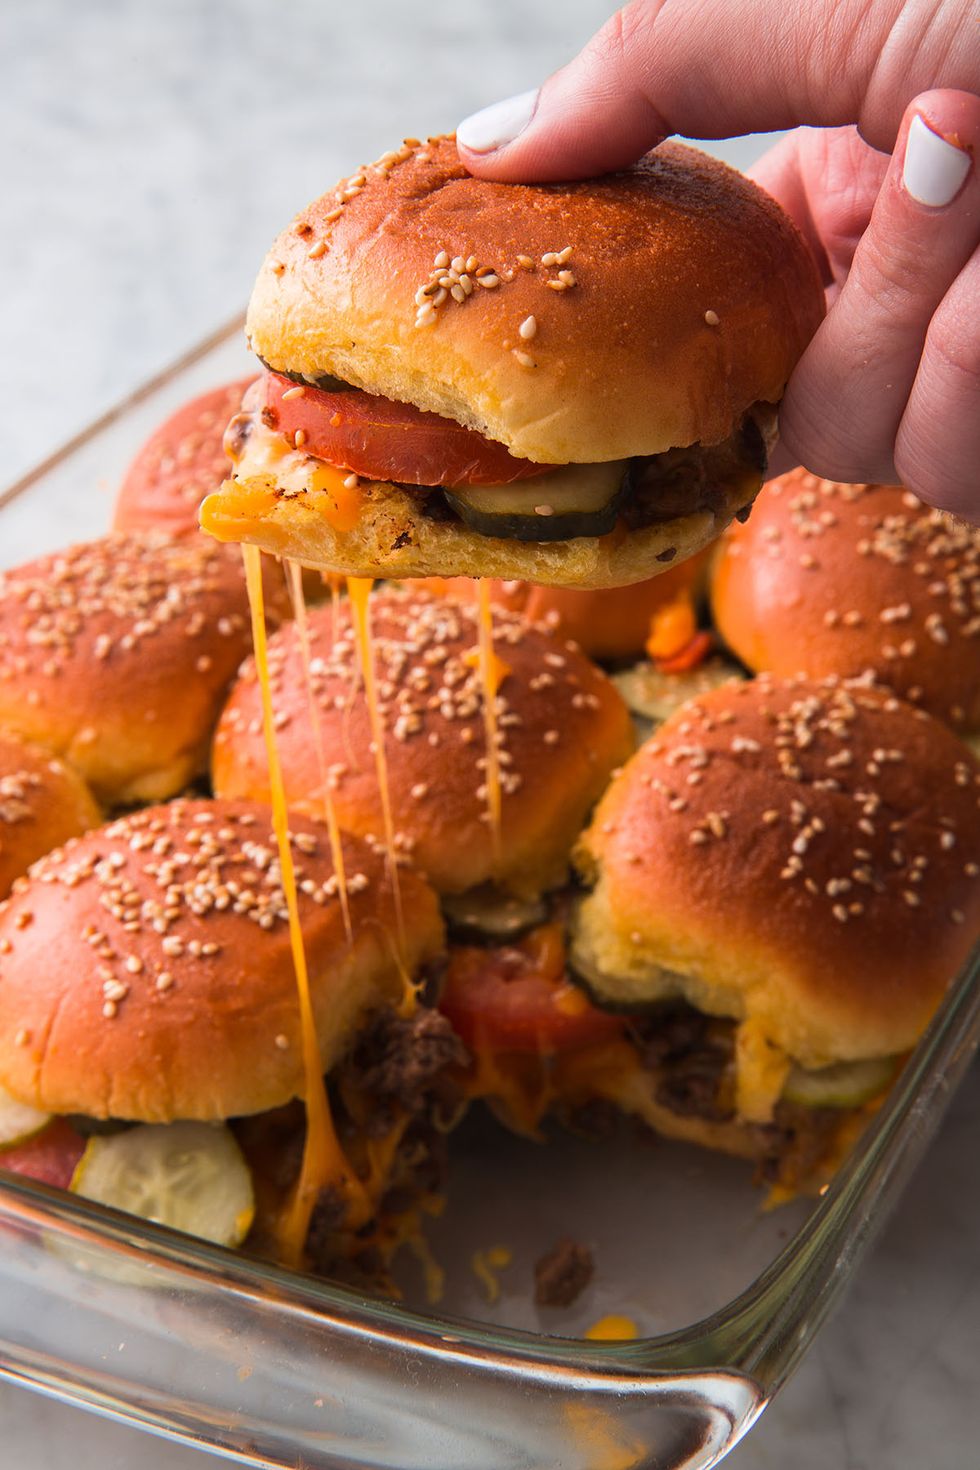 20 Delicious Slider Recipes  Carrie's Experimental Kitchen